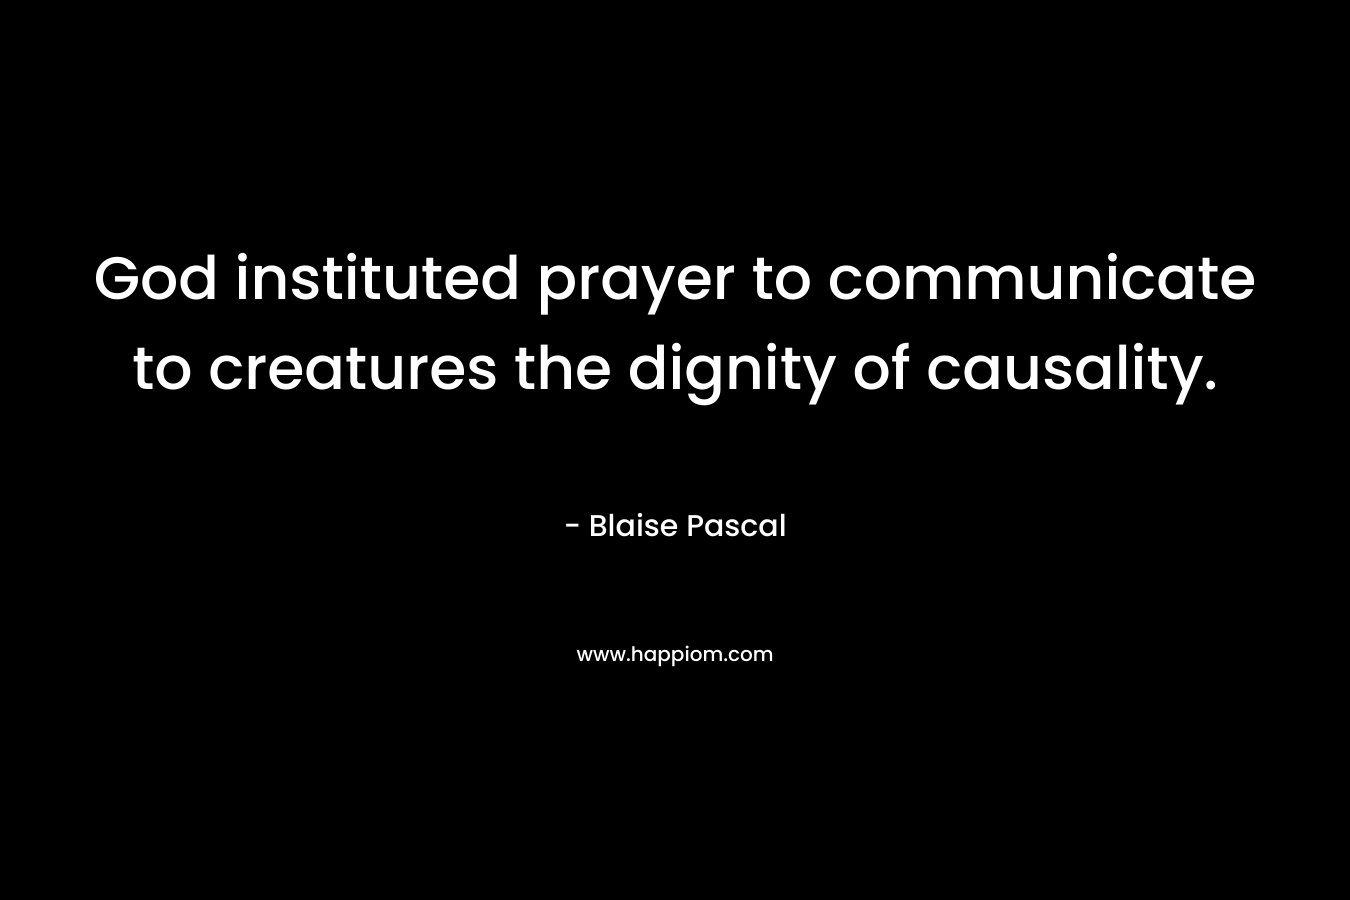 God instituted prayer to communicate to creatures the dignity of causality. – Blaise Pascal